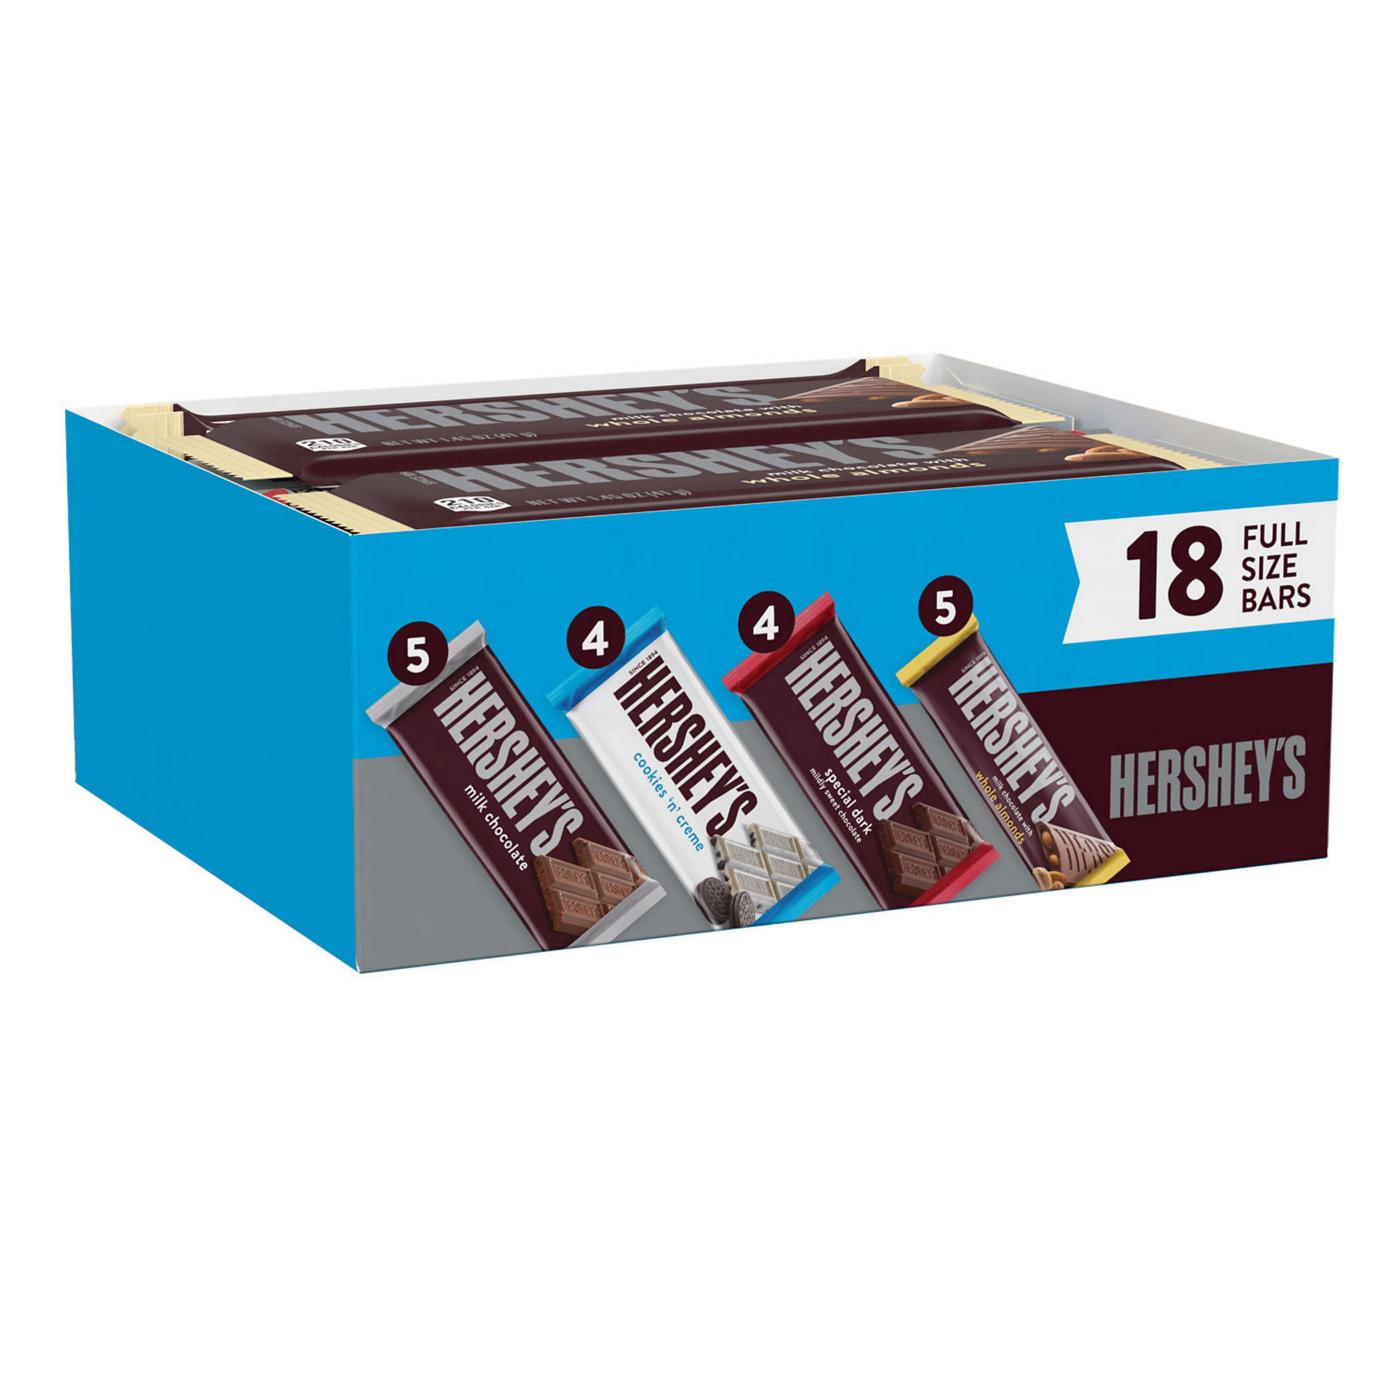 Hershey's Assorted Full Size Candy Bars Box; image 4 of 8